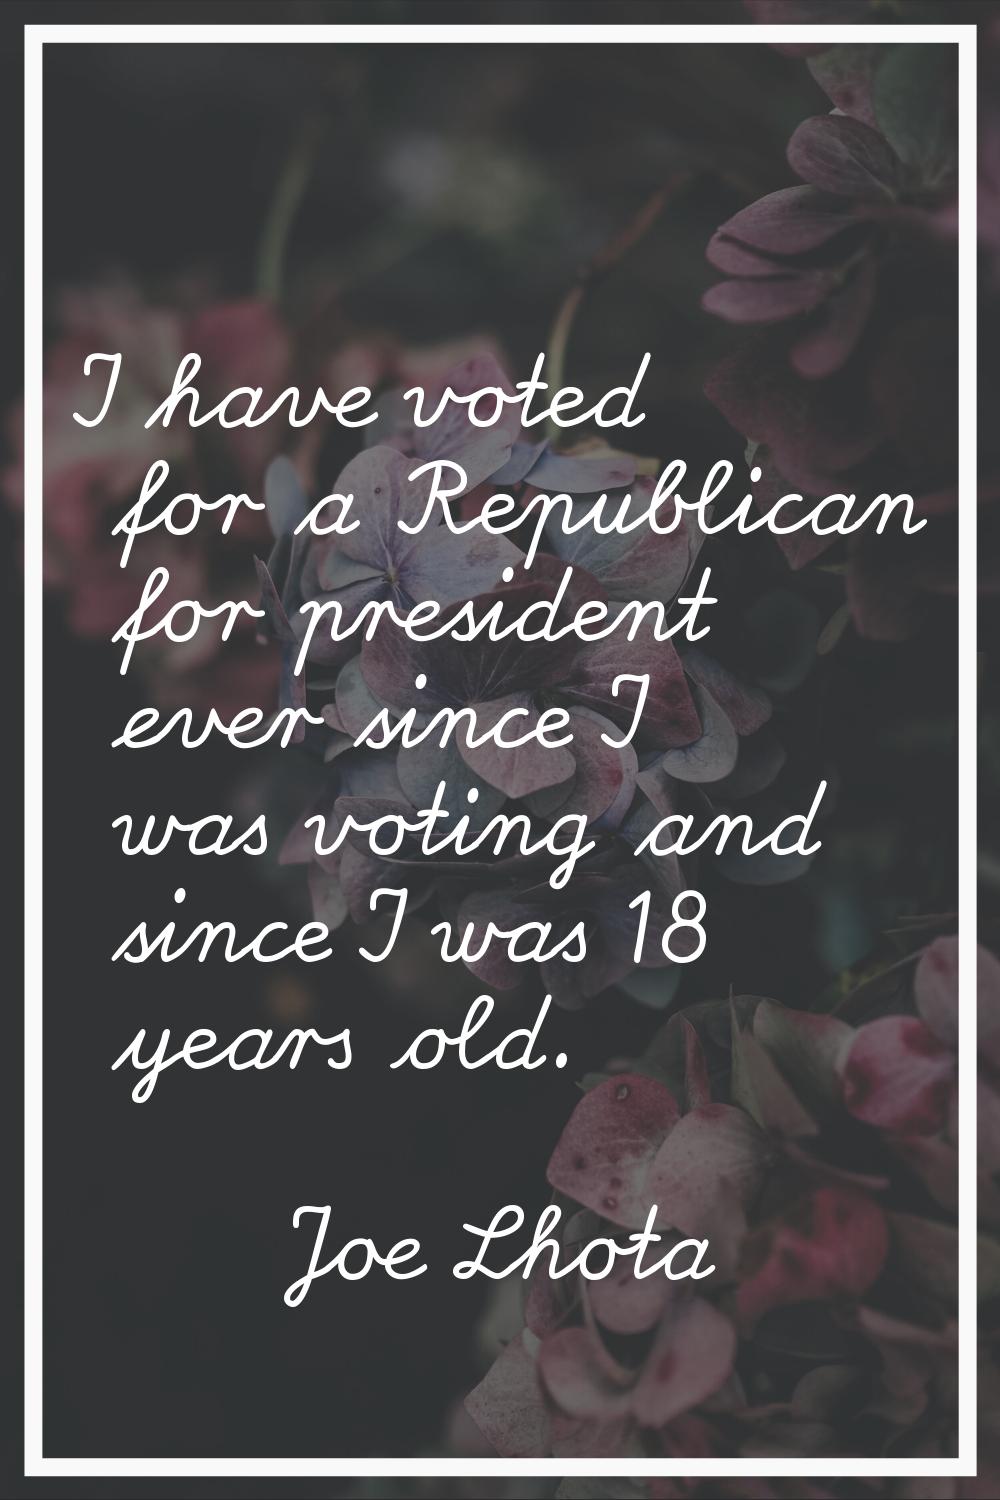 I have voted for a Republican for president ever since I was voting and since I was 18 years old.